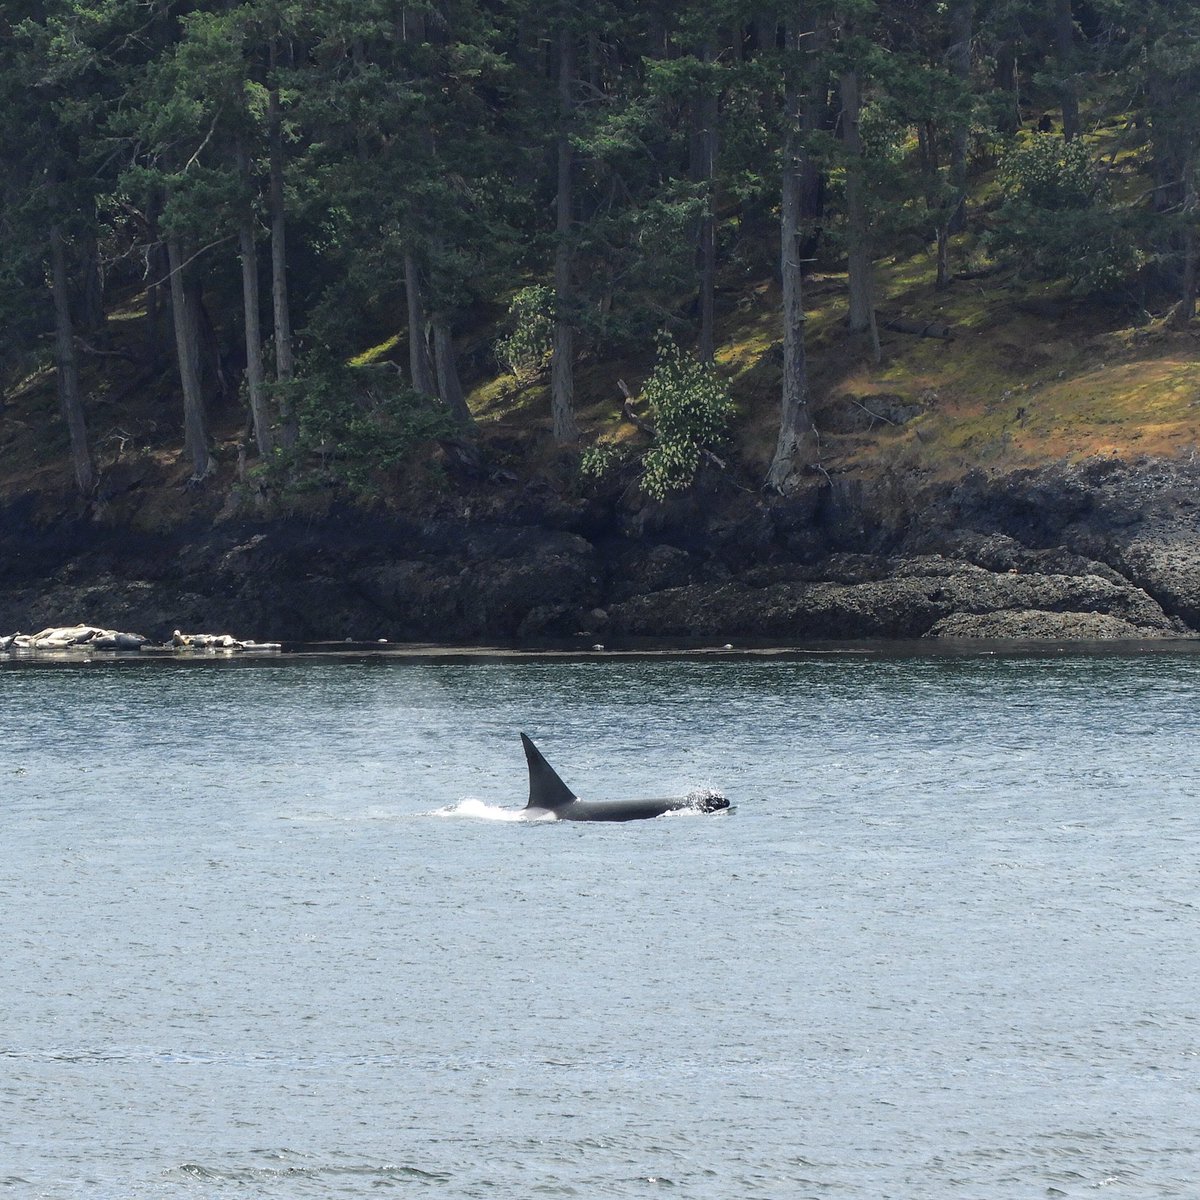 Lone male T124C came for a visit today! He exited southbound Active Pass and then looped back around northbound. 🐳👀 #orca #killerwhale #wildandfree #emptythetanks #captivitysucks #marinelandsucks